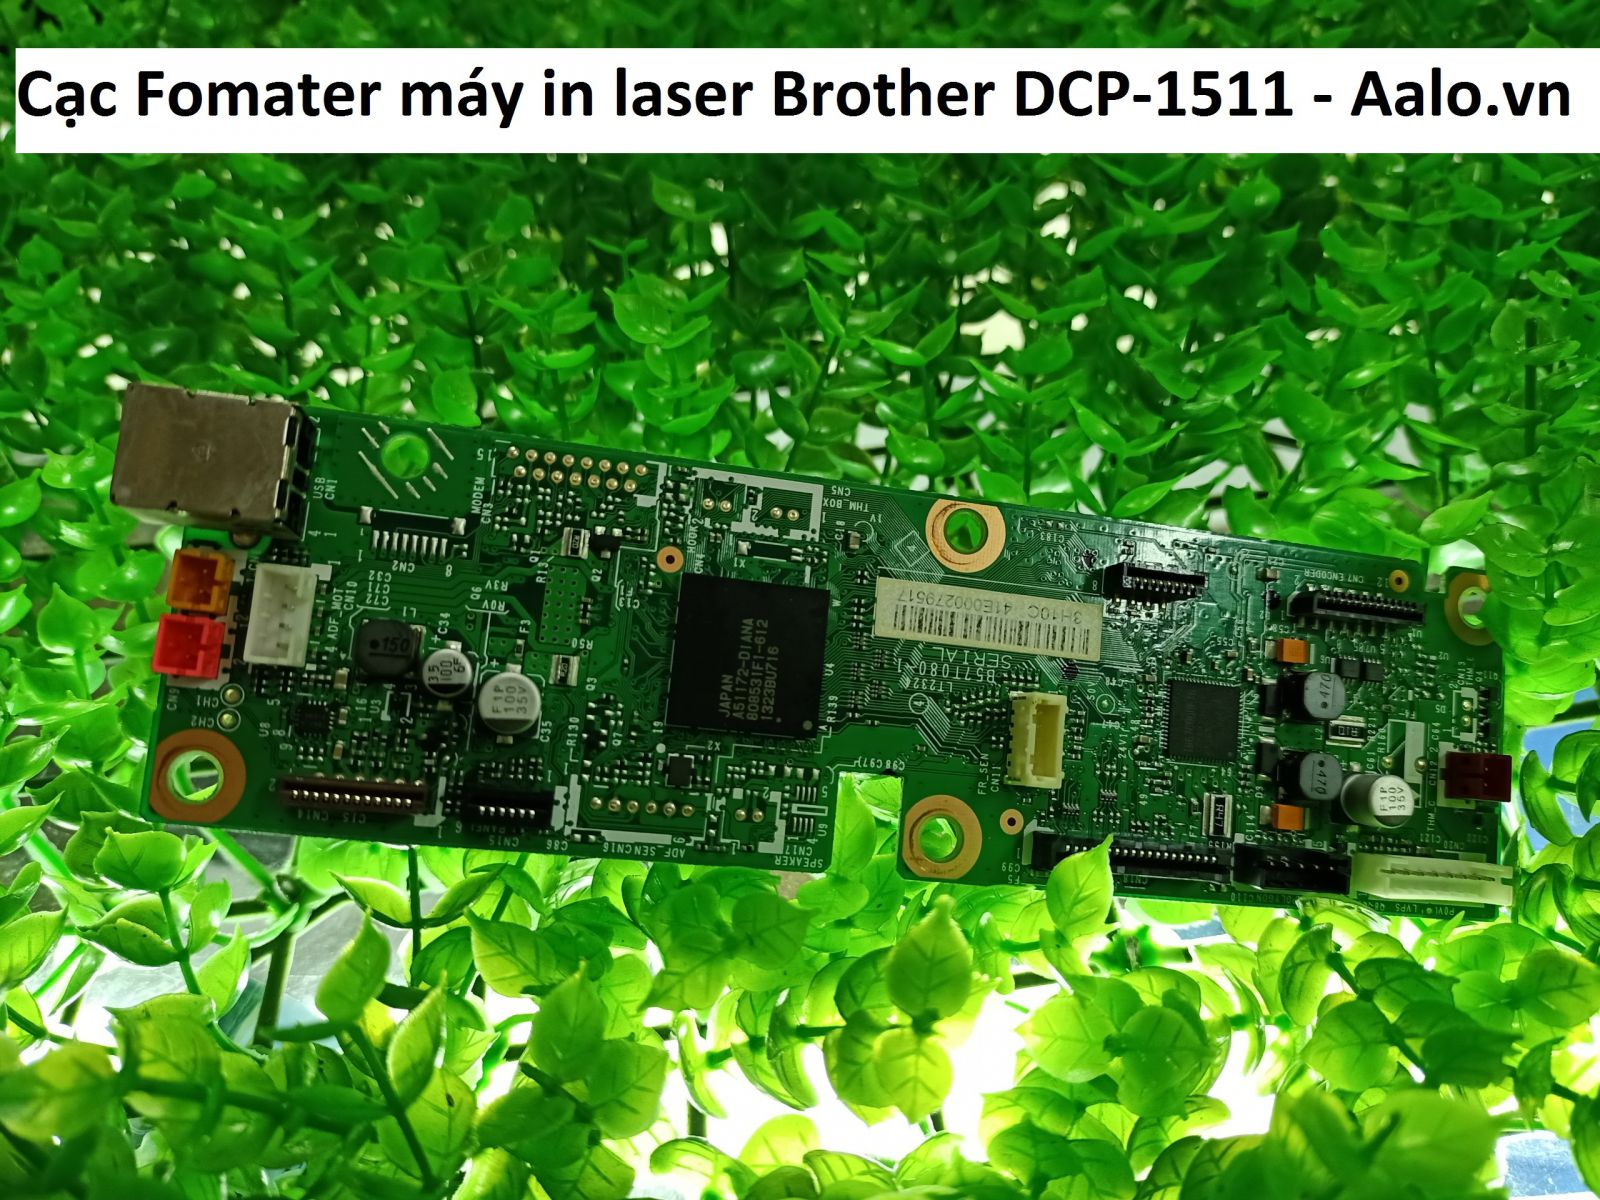 Cạc Fomater máy in laser Brother DCP-1511 - Aalo.vn